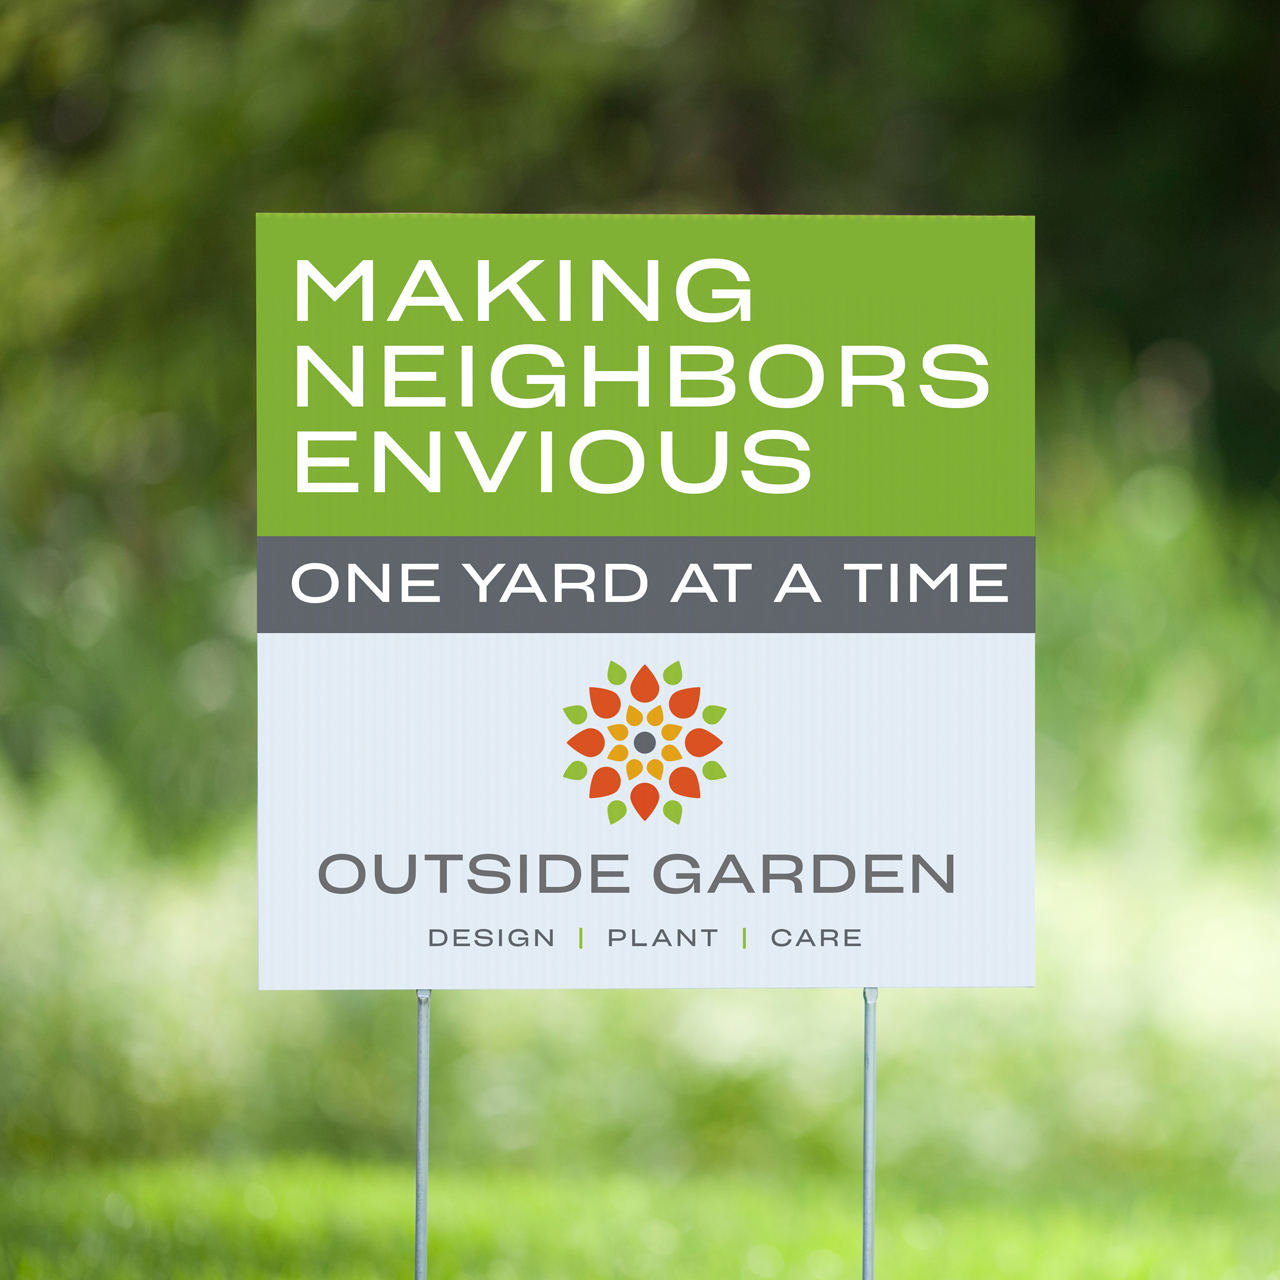 An image of the yard sign for Outside Garden that reads "Making Neighbors Envious One Yard at a Time"